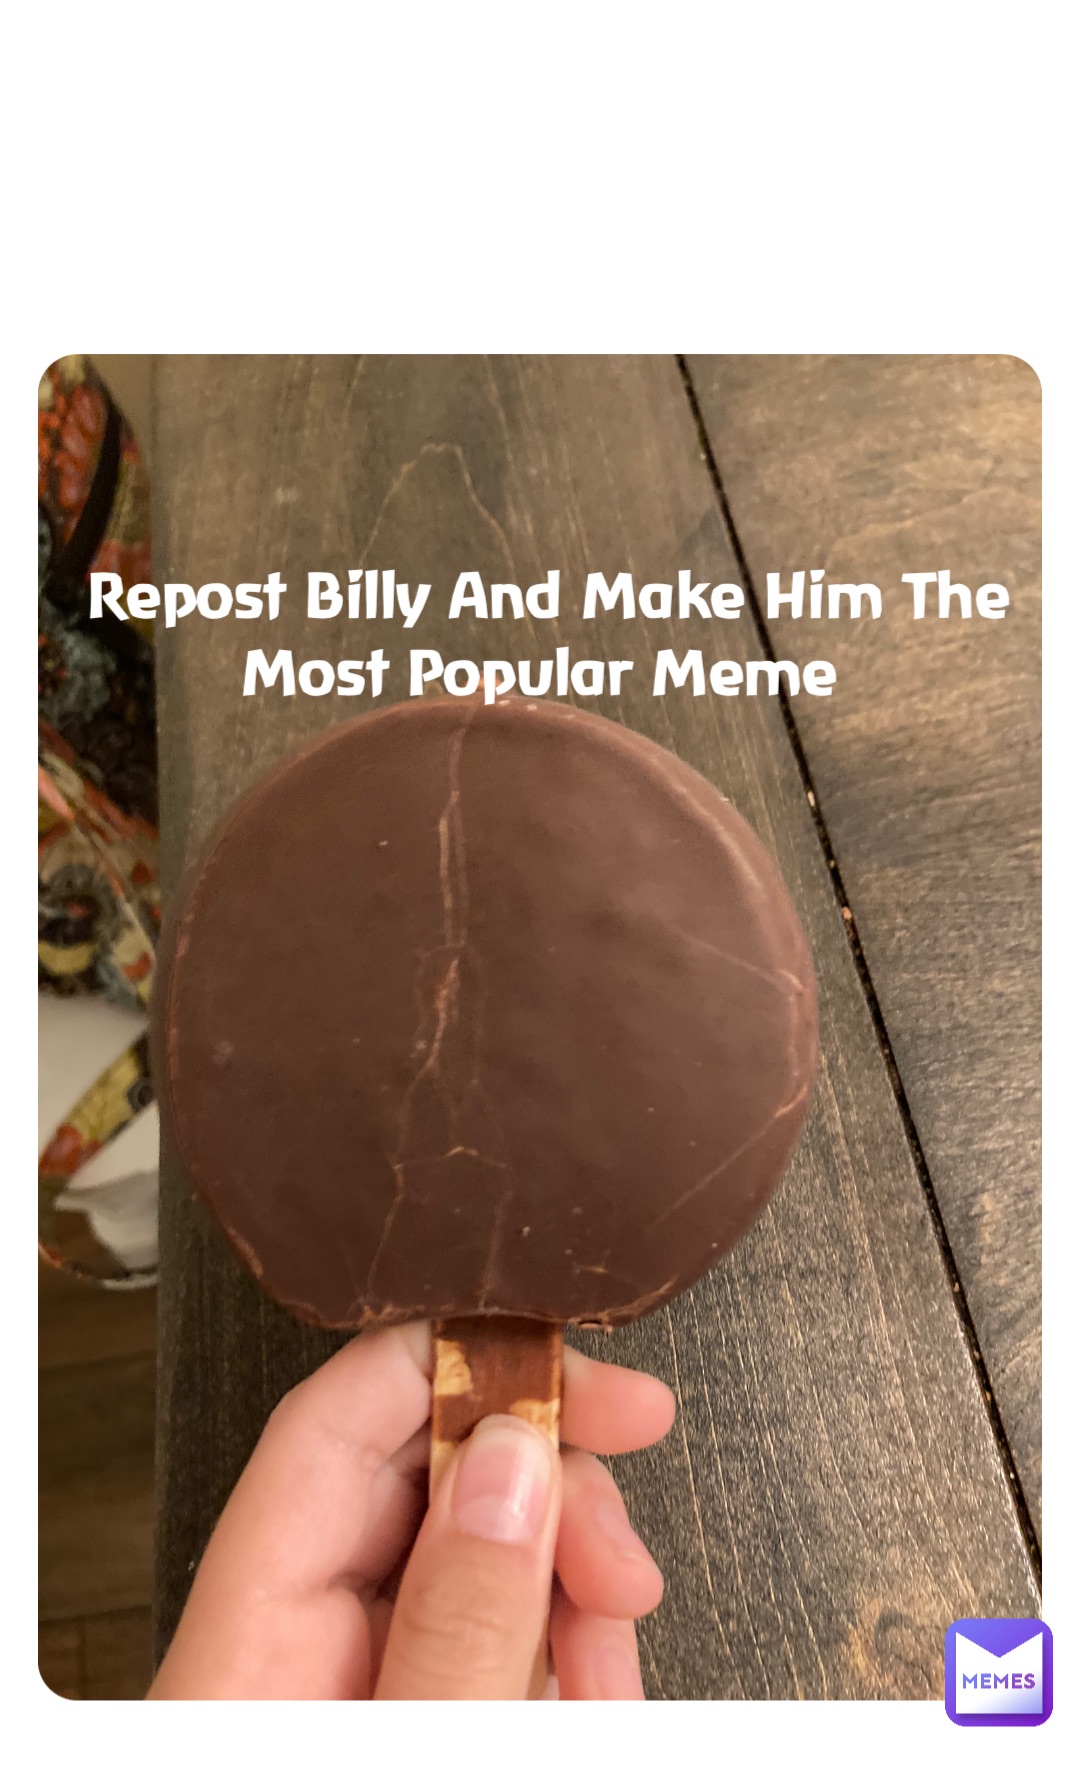 Repost Billy And Make Him The Most Popular Meme